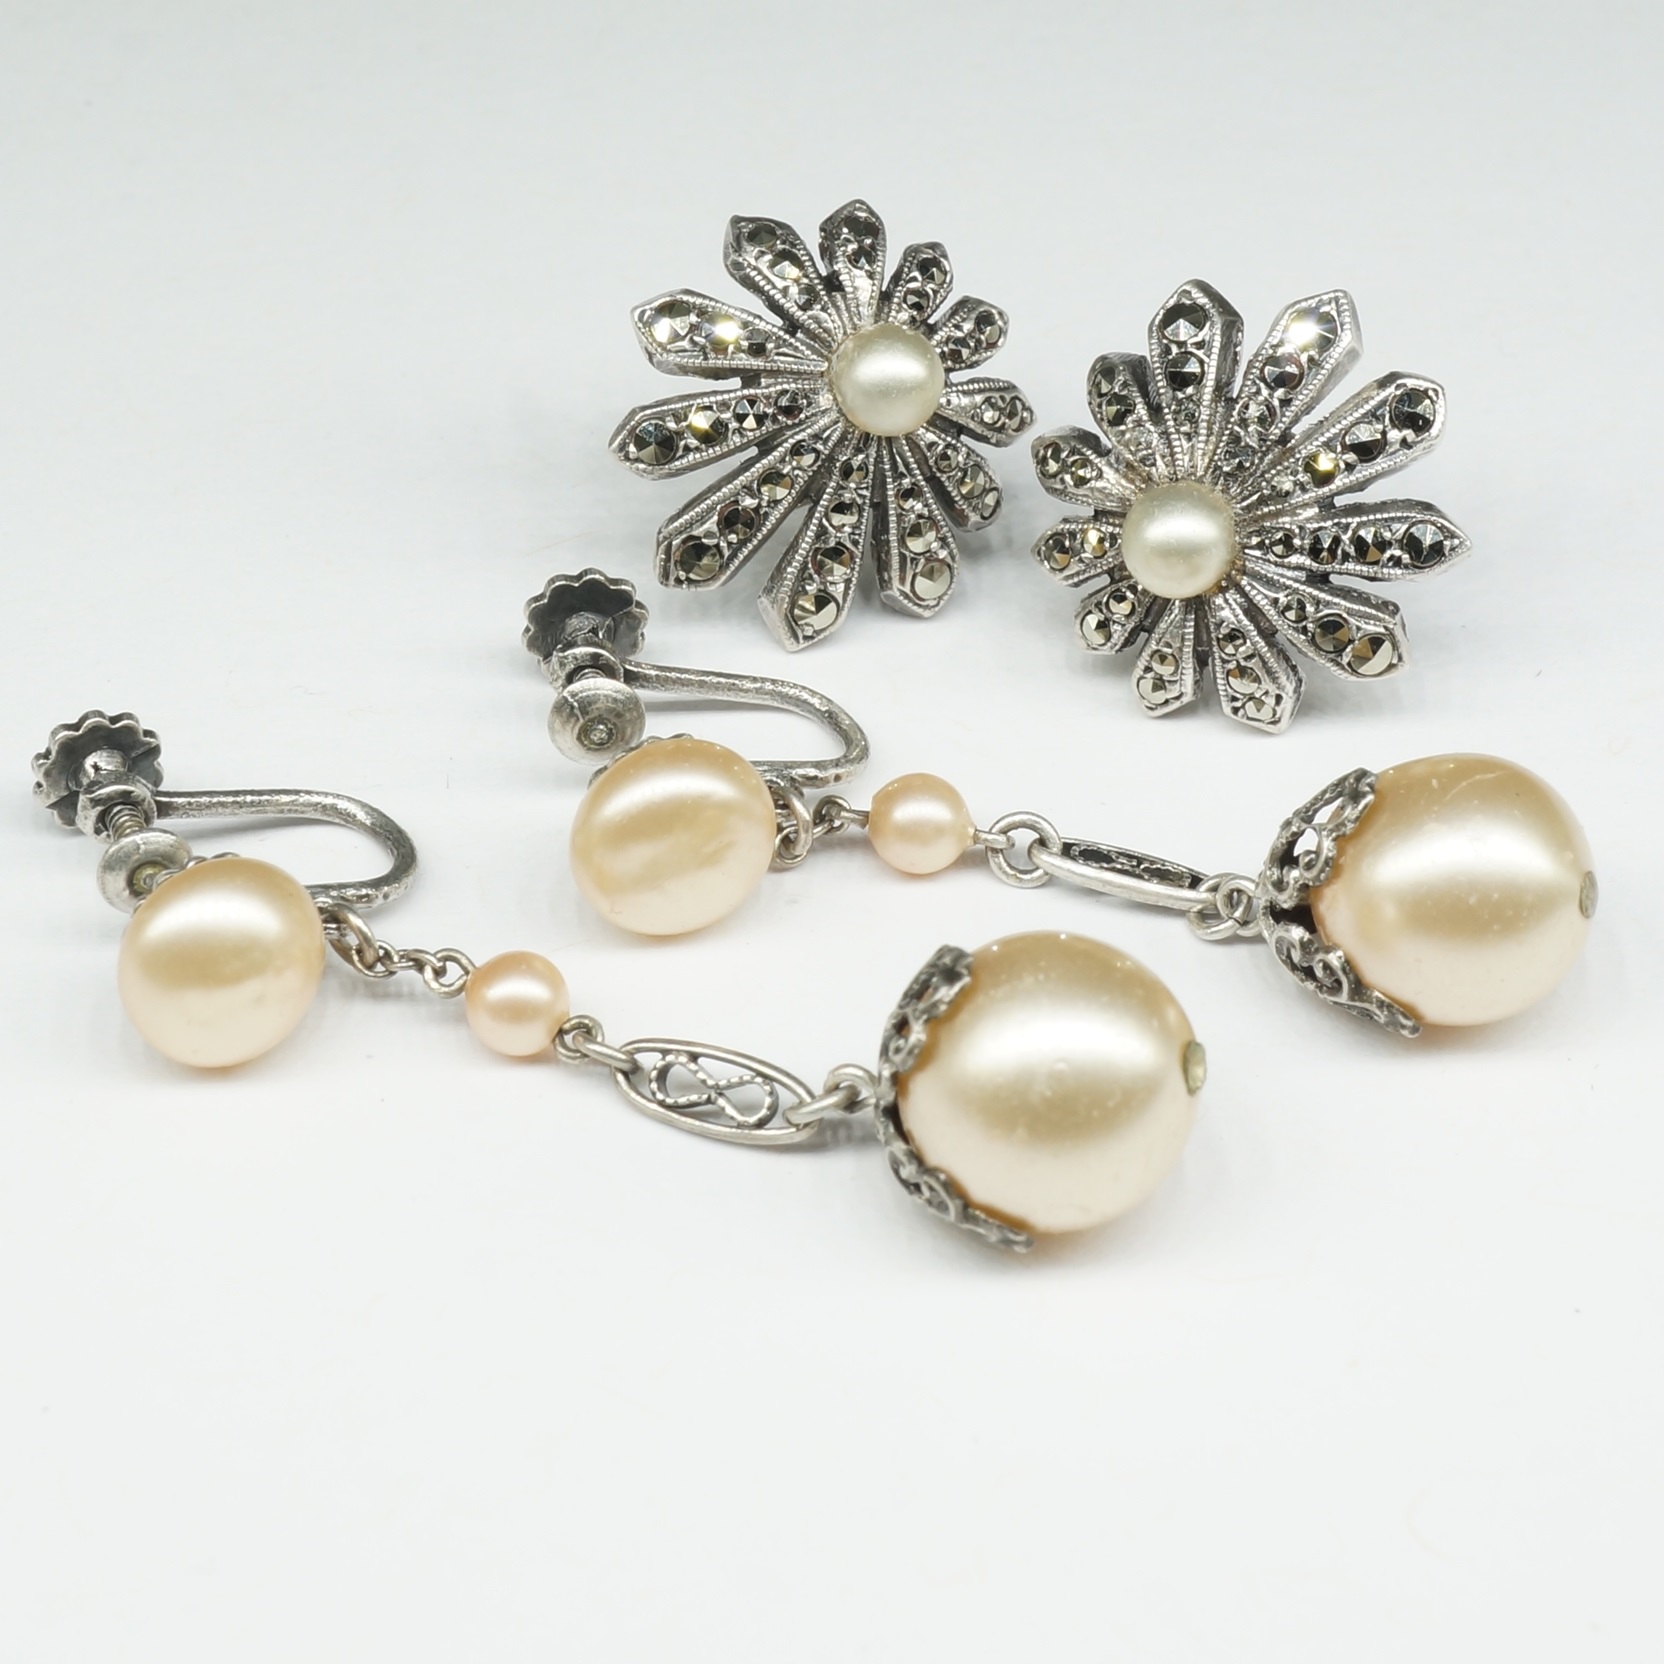 'Silver and Marcasite and Imitation Pearl Jewellery'